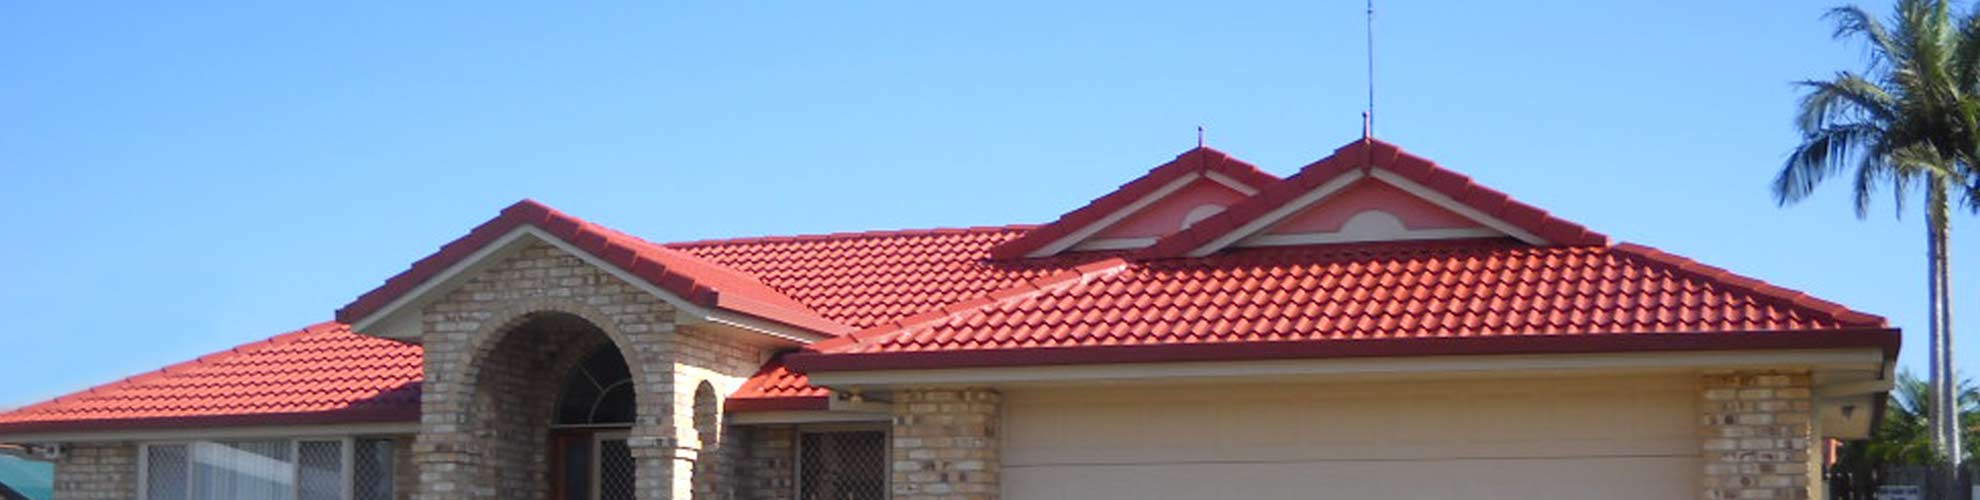 tile-roof-painted-red-by-nevs-roof-restoration